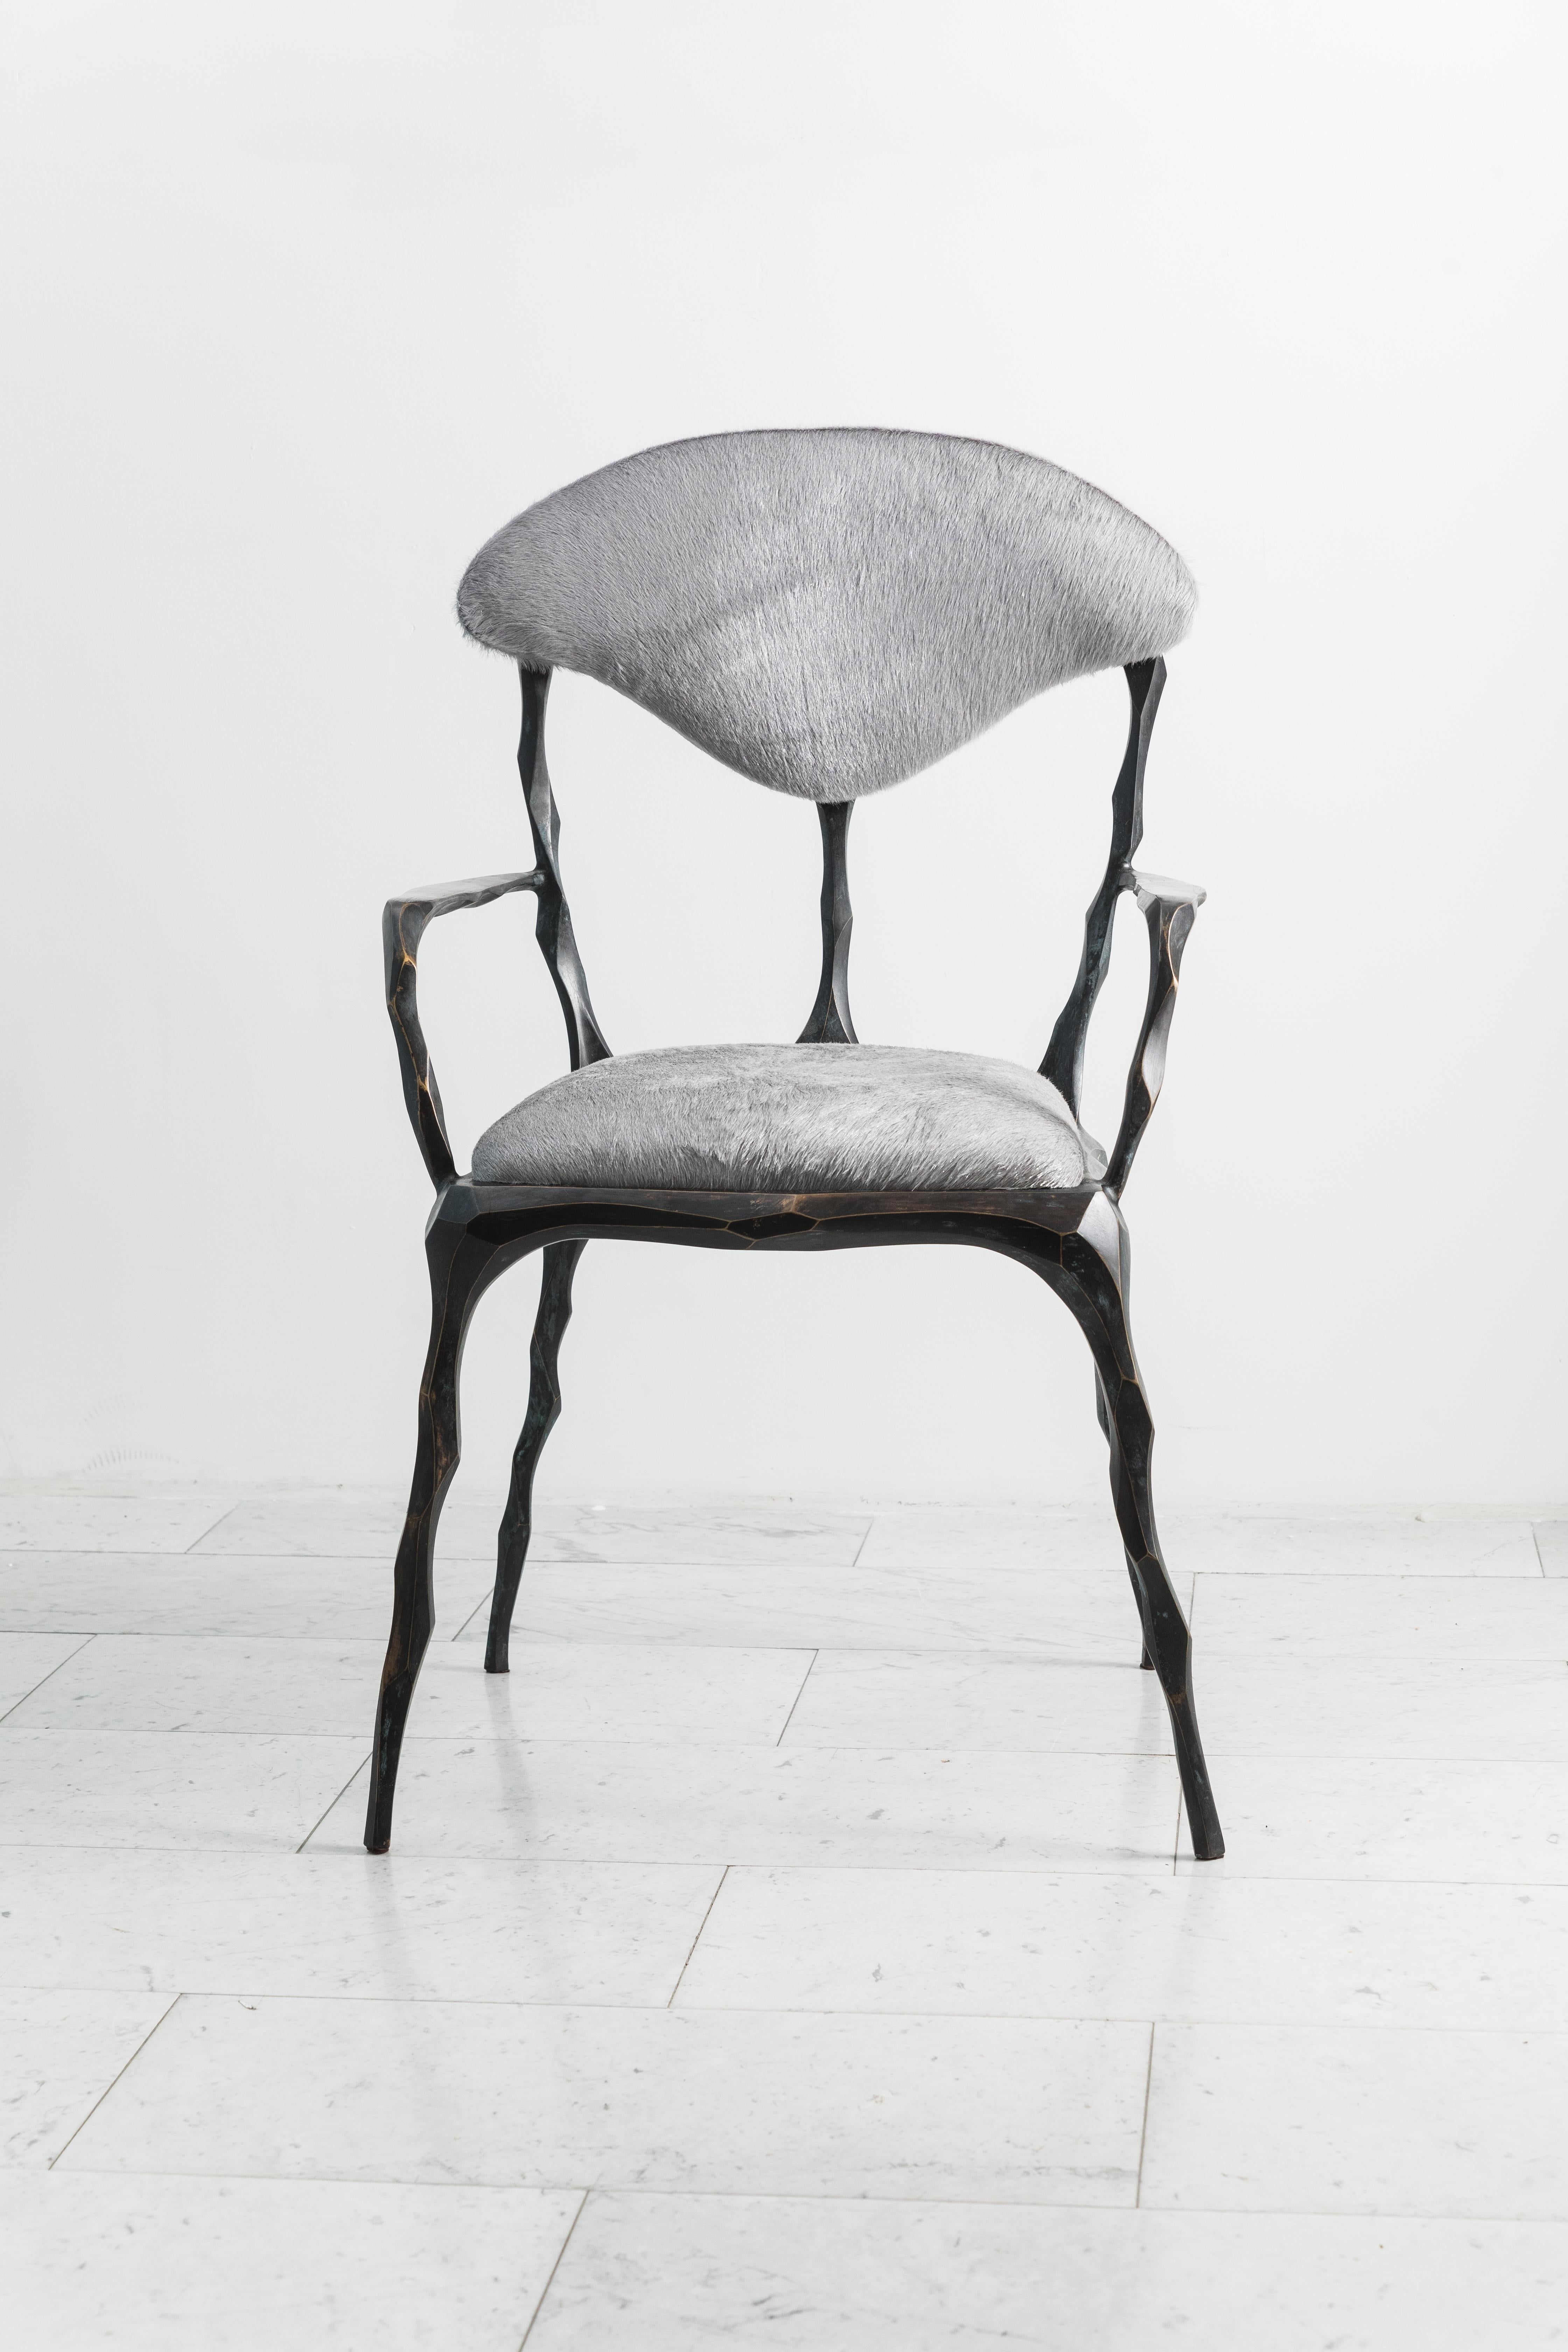 Taking inspiration from the twisting forms of seaweed and other natural materials, Haase hand-carves each element of his unique dining chair before casting it in his New York City studio. The bronze components are then welded together by the artist